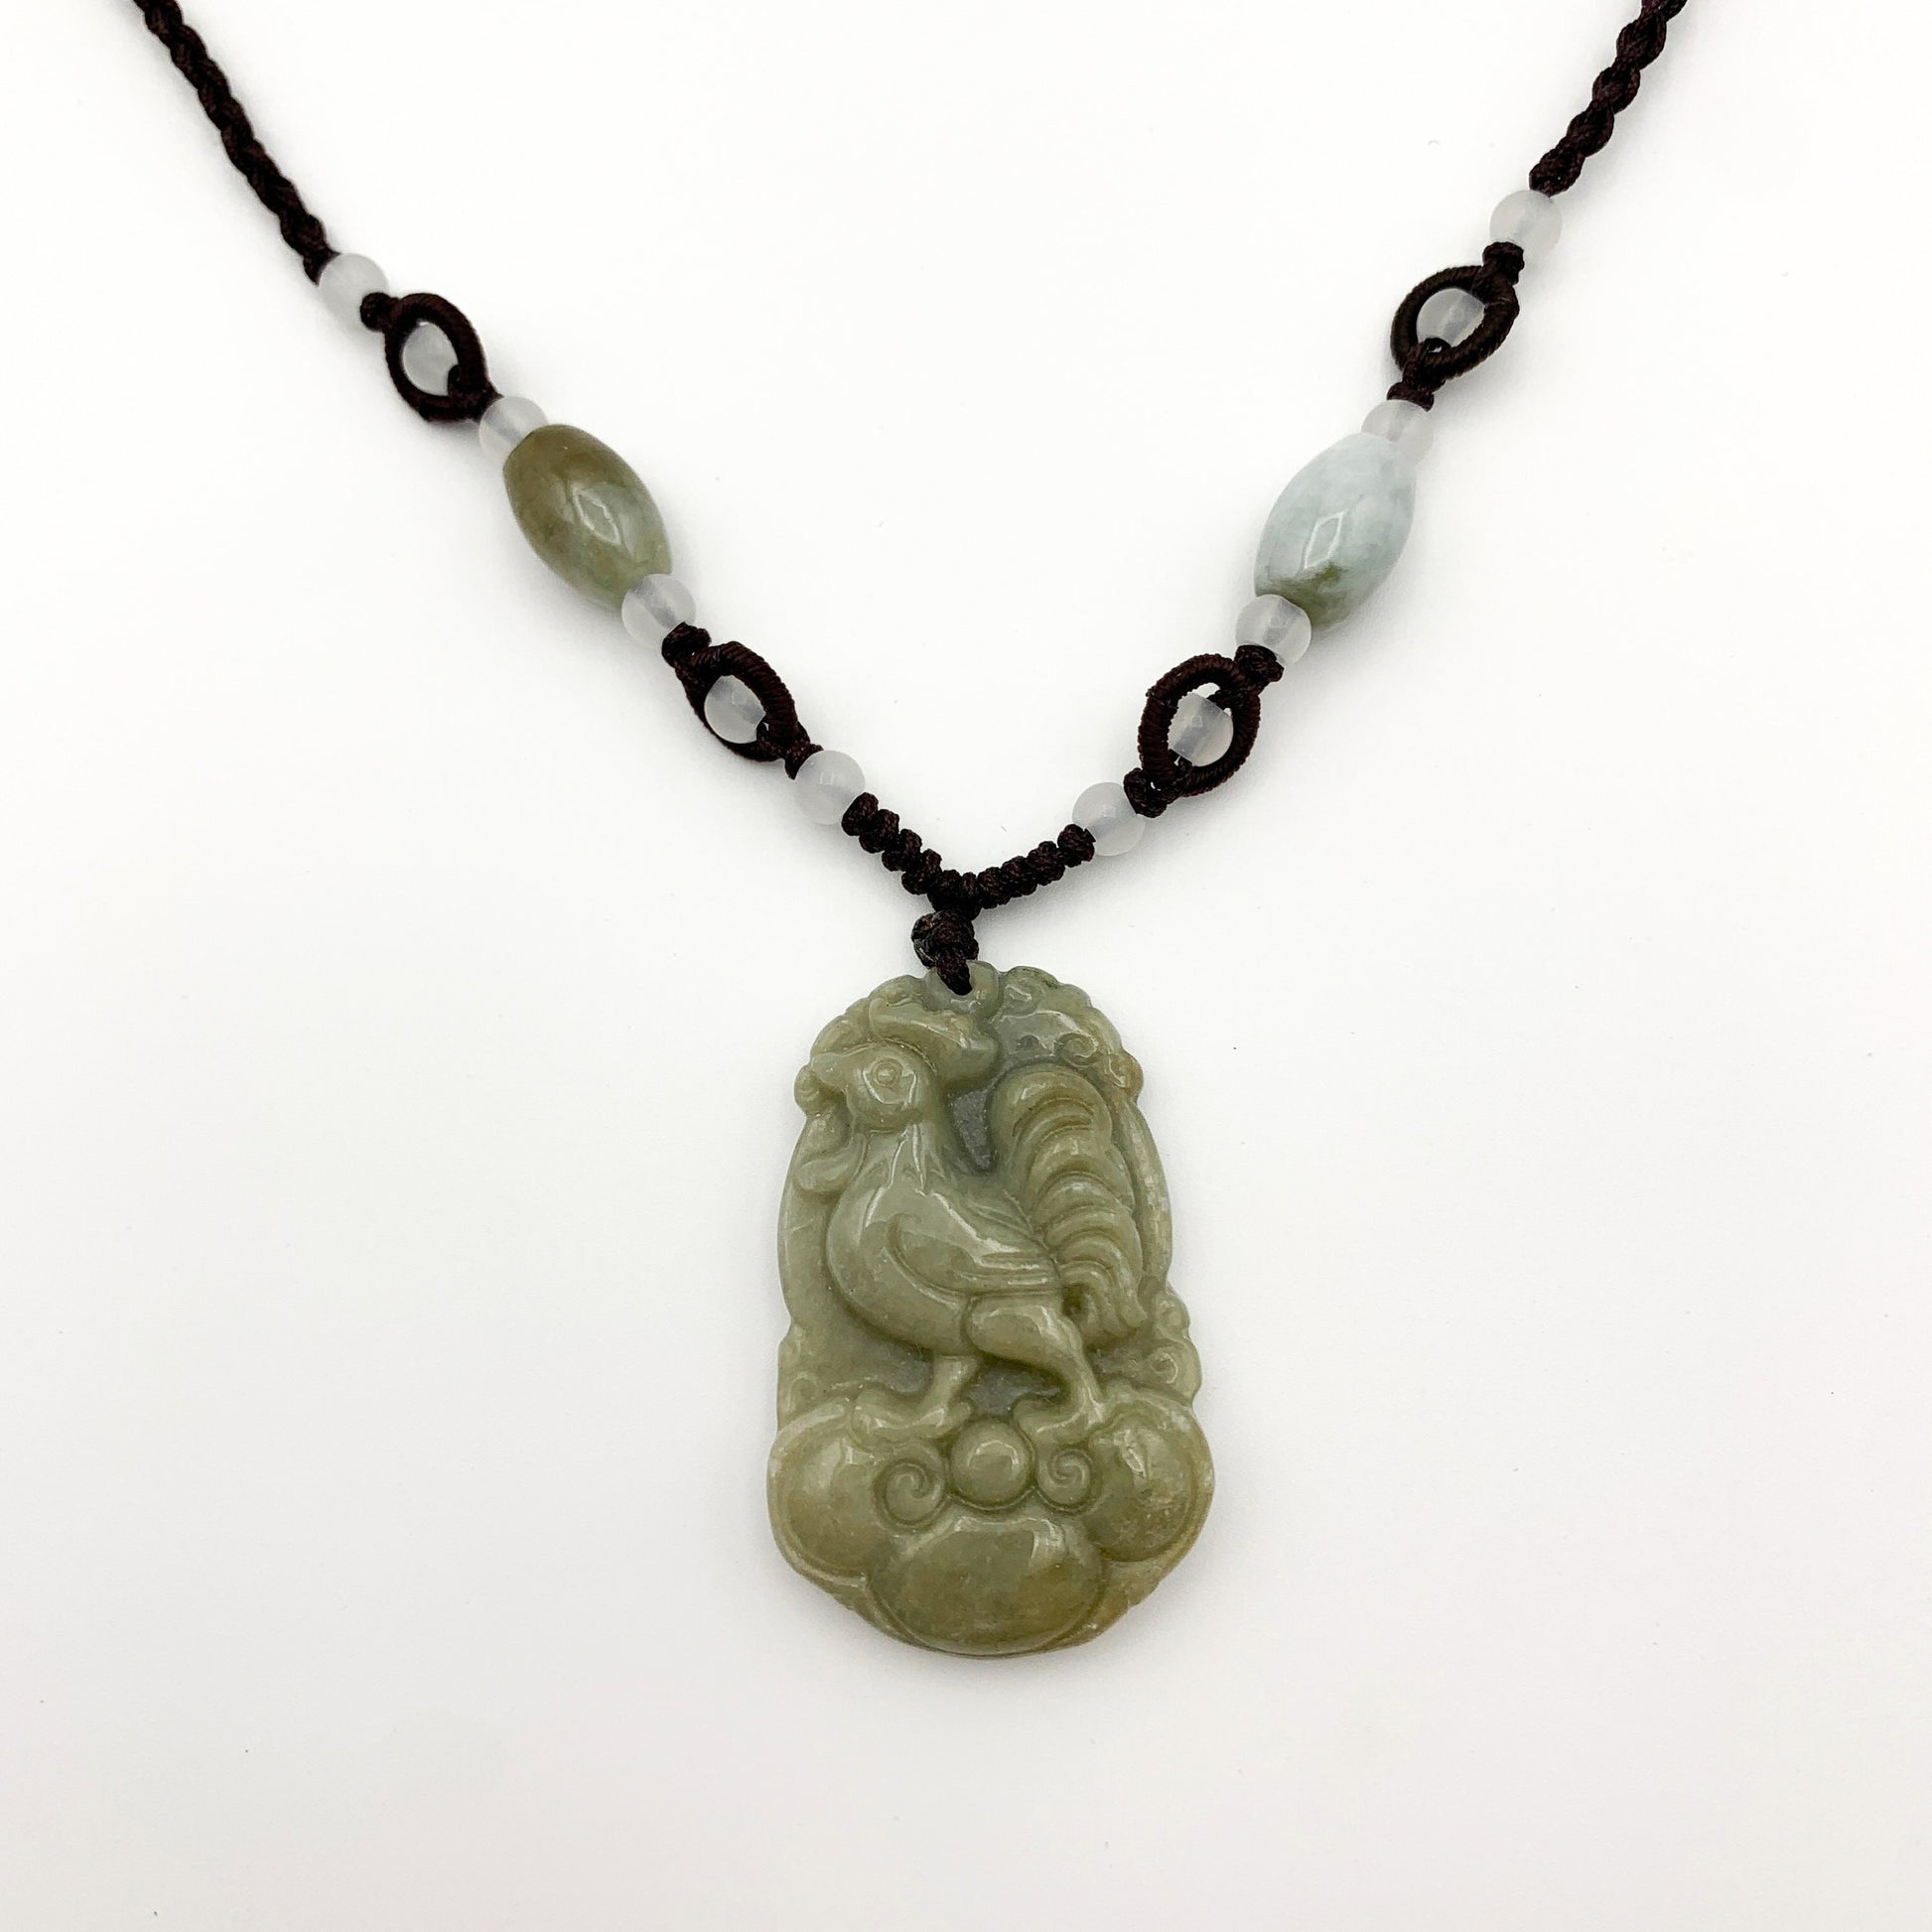 Jadeite Jade Rooster Chicken Chinese Zodiac Carved Rustic Pendant Necklace, YW-0110-1646195054 - AriaDesignCollection